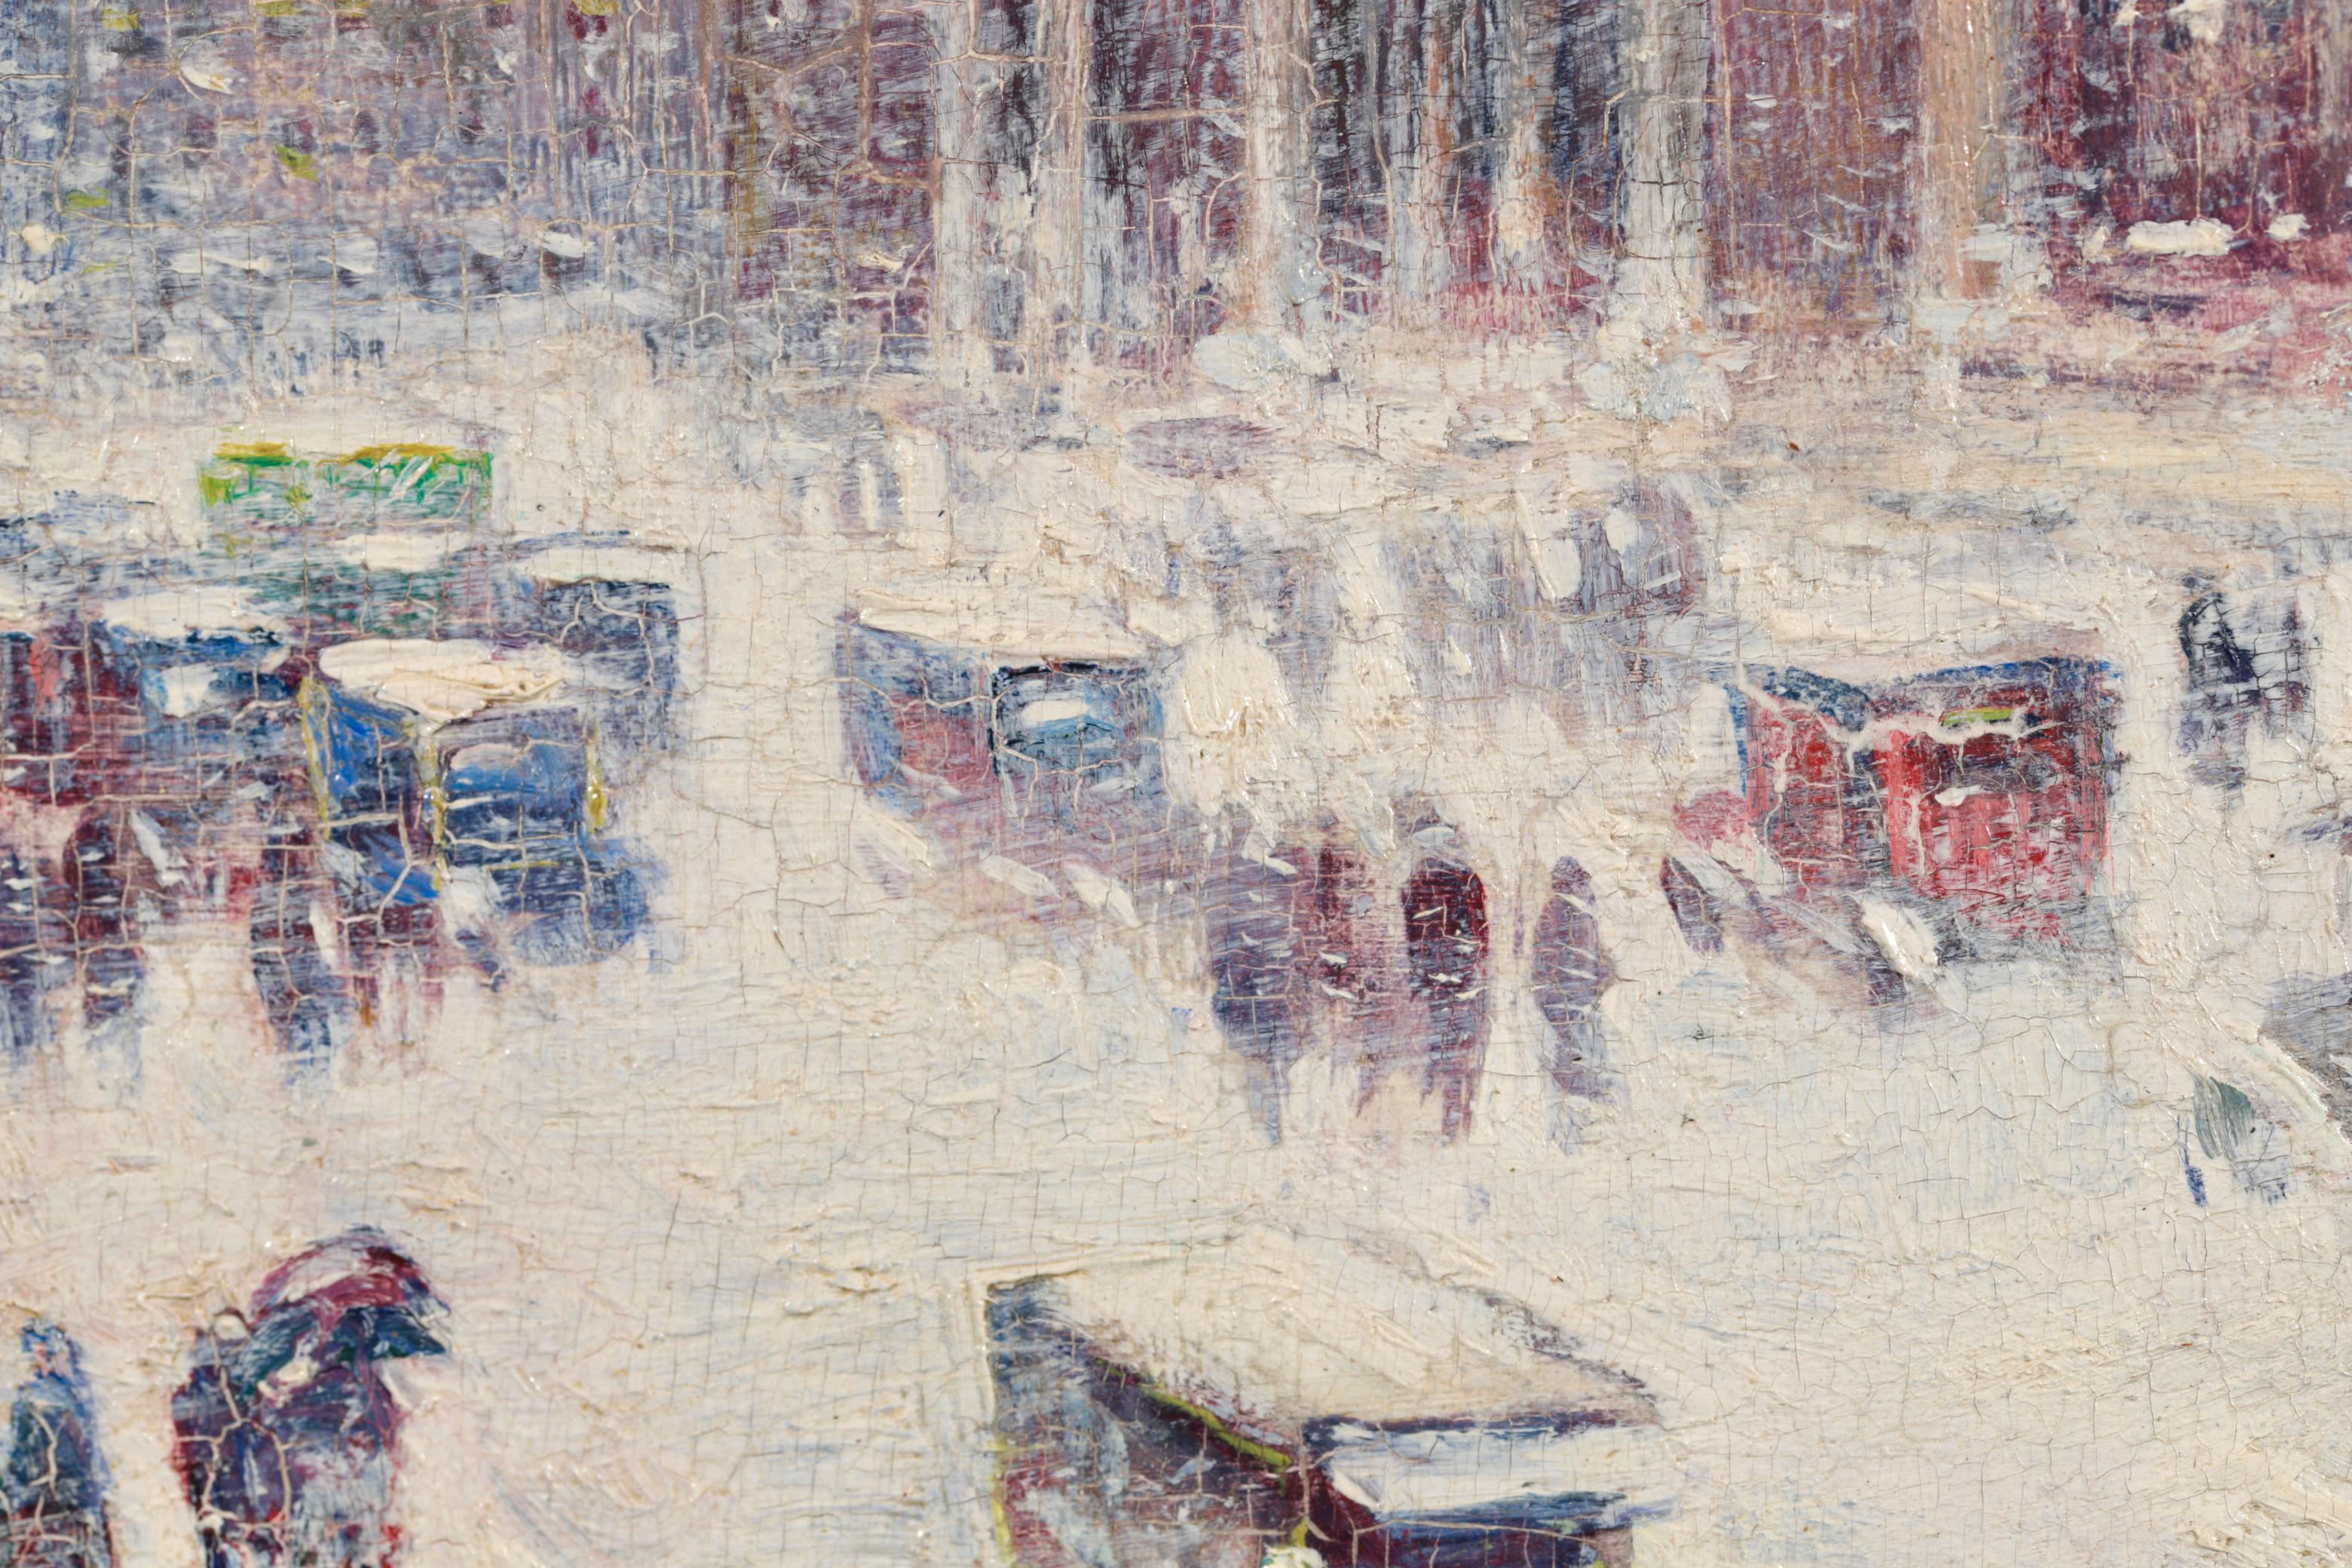 Signed and titled figures in cityscape oil on panel circa 1920 by American impressionist painter Guy Carleton Wiggins. This wonderful piece depicts a view of the New York Public Library in the United States of America during a winter snowstorm.